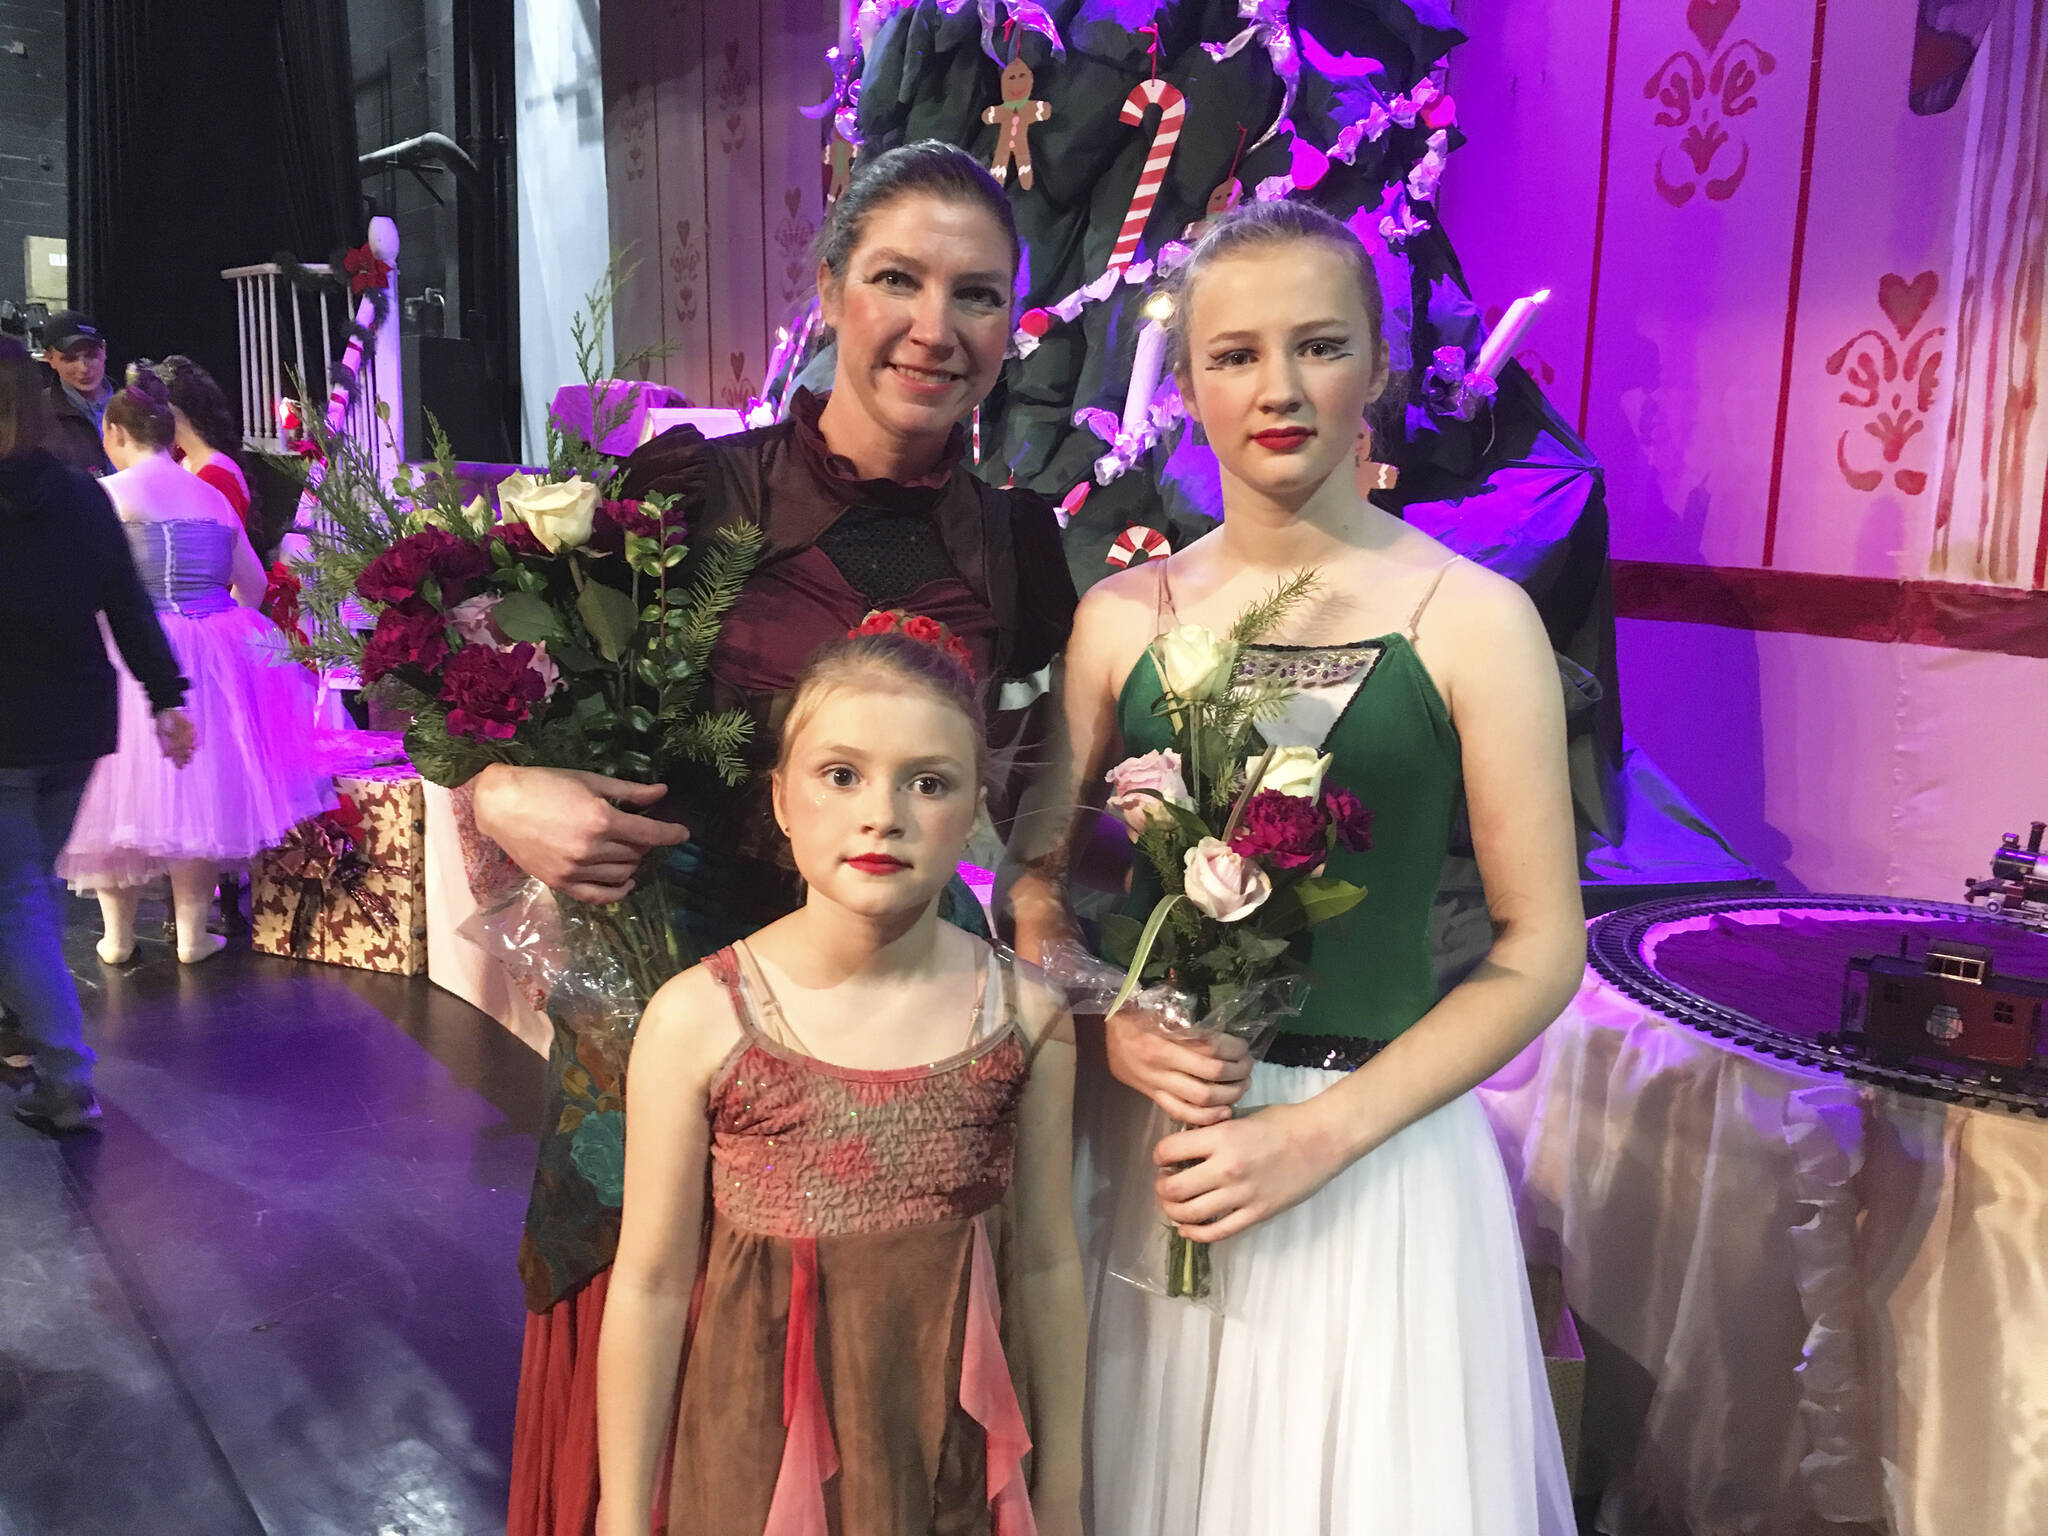 Emilie Springer, left, poses with her daughters, Aurora, bottom left, and Anna, right, after their performance in the 2019 production of the Homer Nutcracker Ballet in Homer, Alaska. (Photo provided)